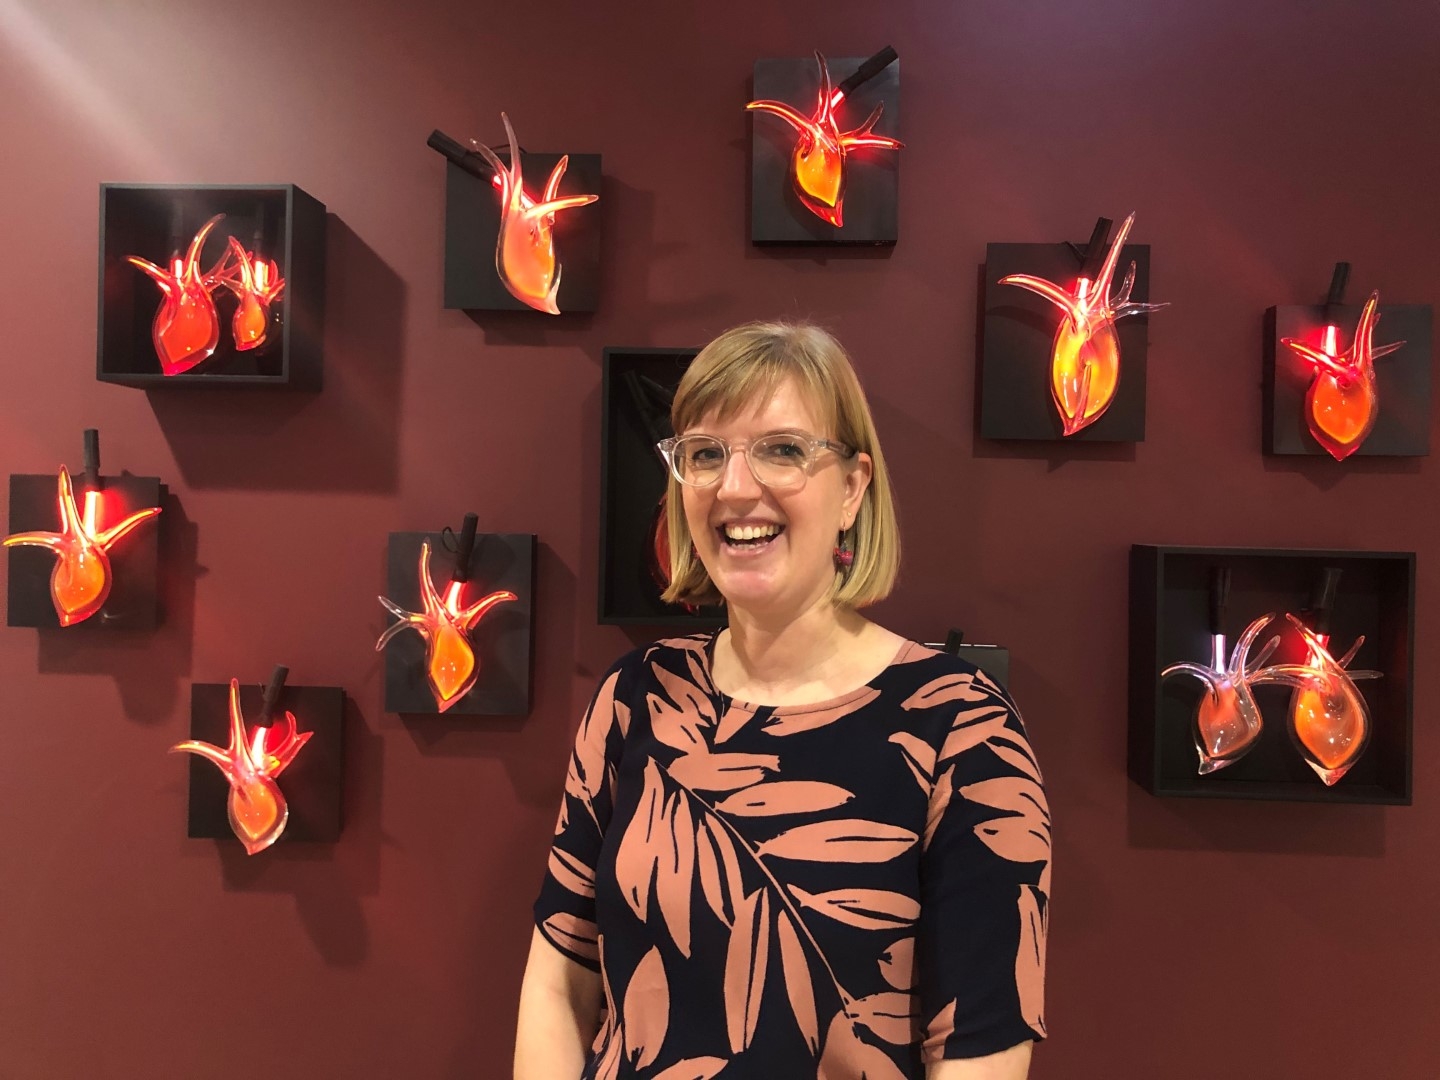 Dr Susie Cartledge smiling in front of a wall of beating hearts